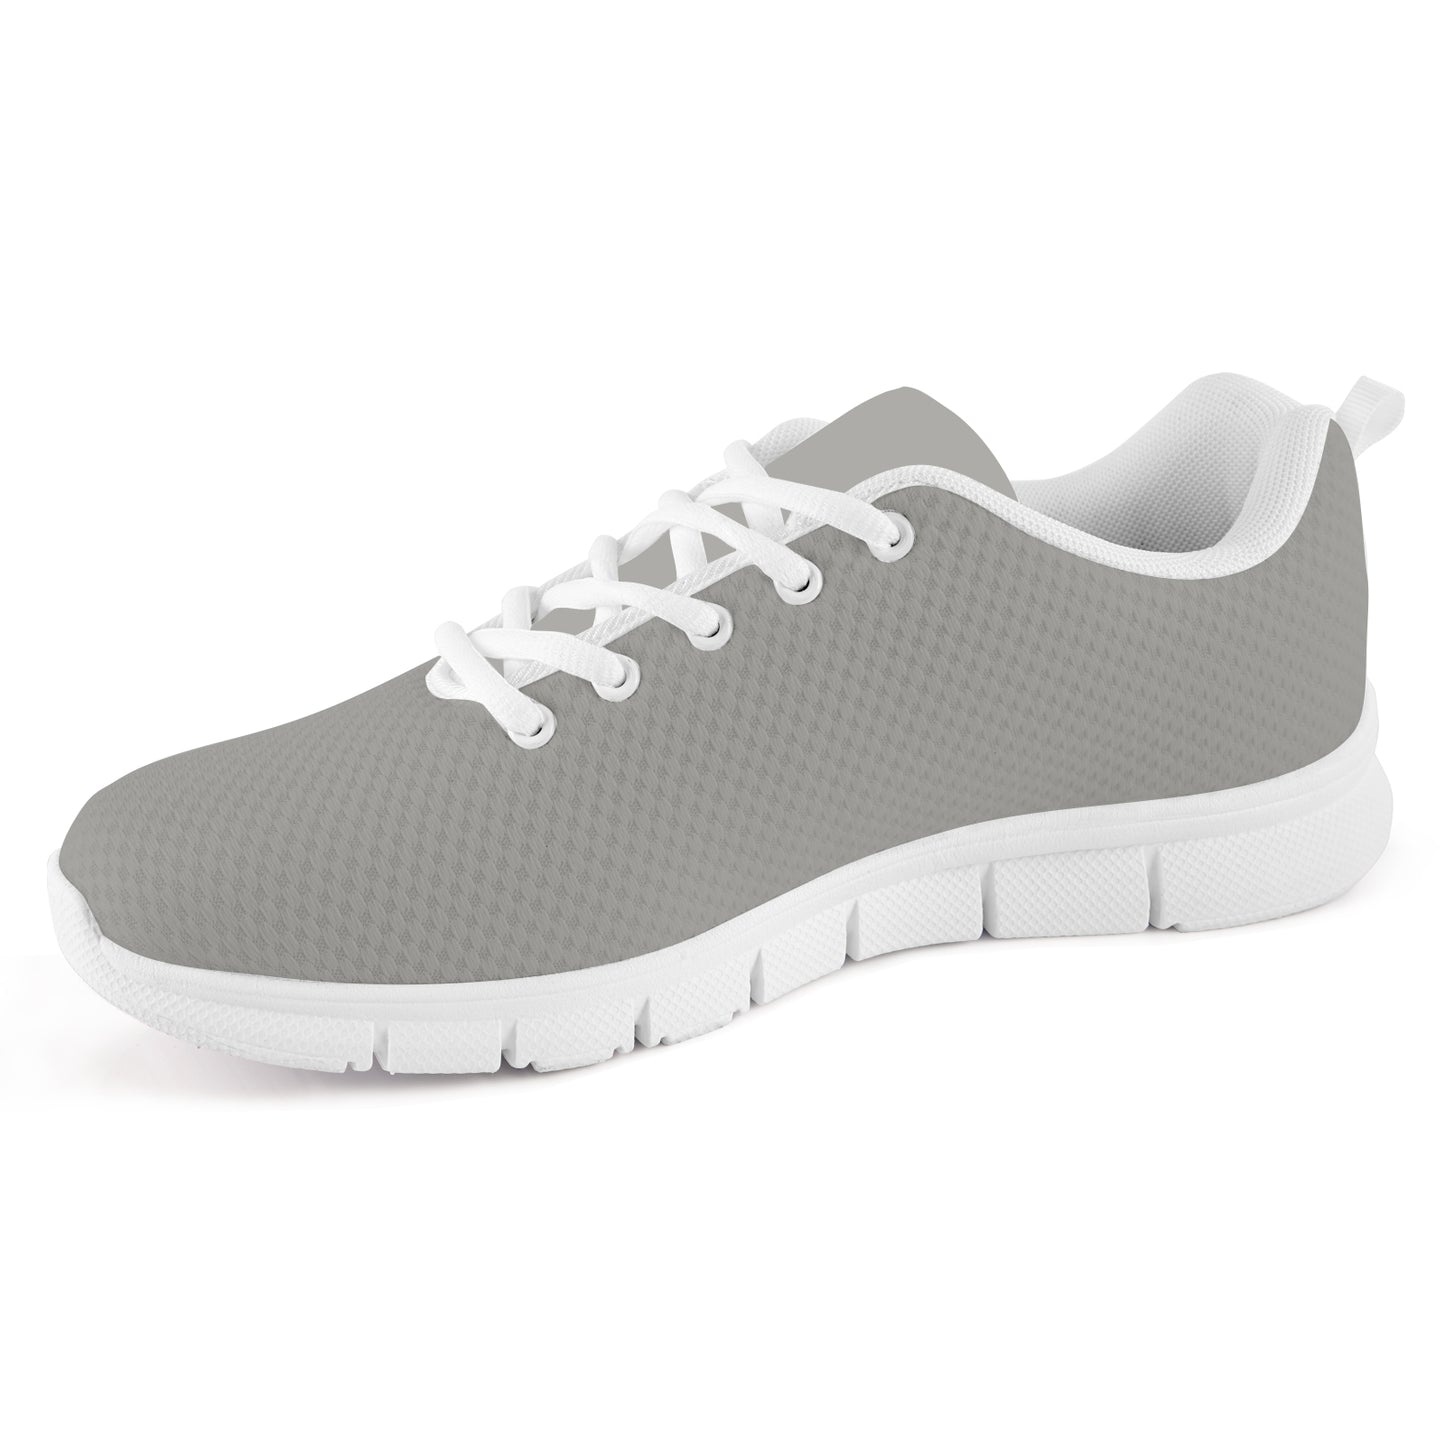 Men's Breathable Sneakers - Classic Grey